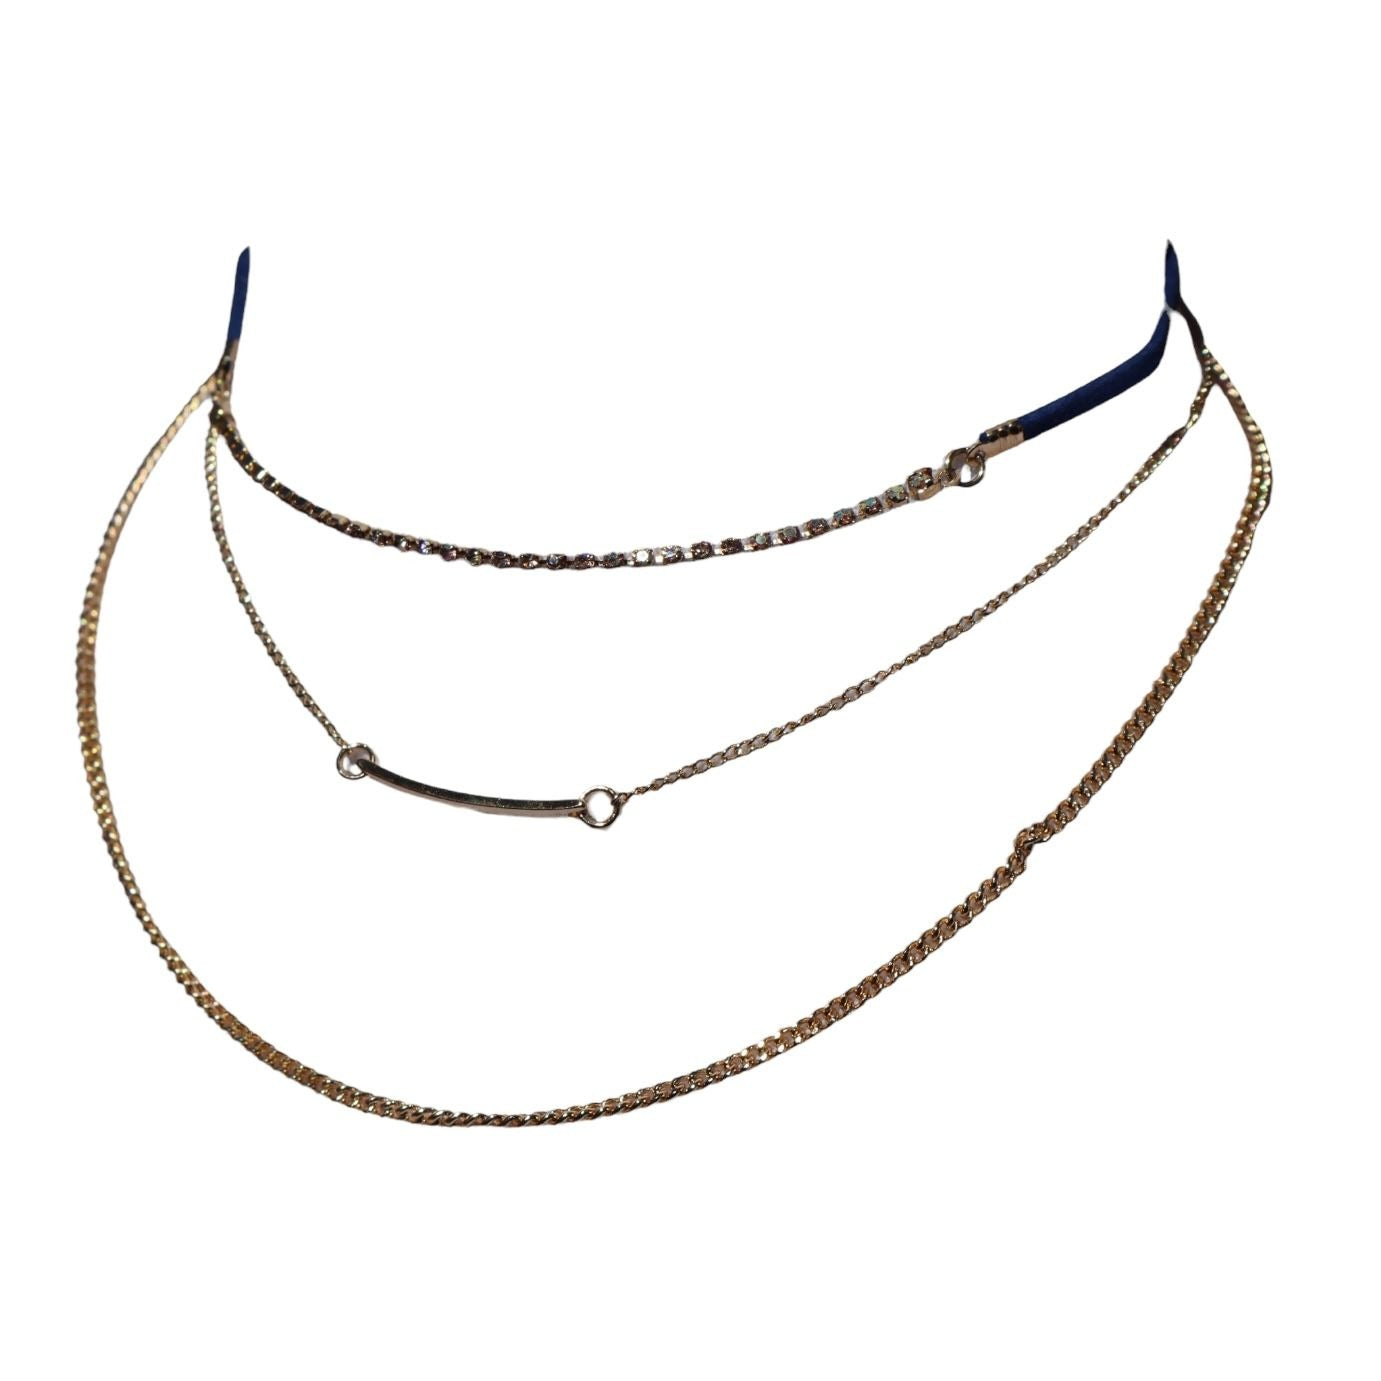 Carisma 3 in 1 Choker Necklace Gold Tone With Blue Faux Velvet, Women's Jewelry